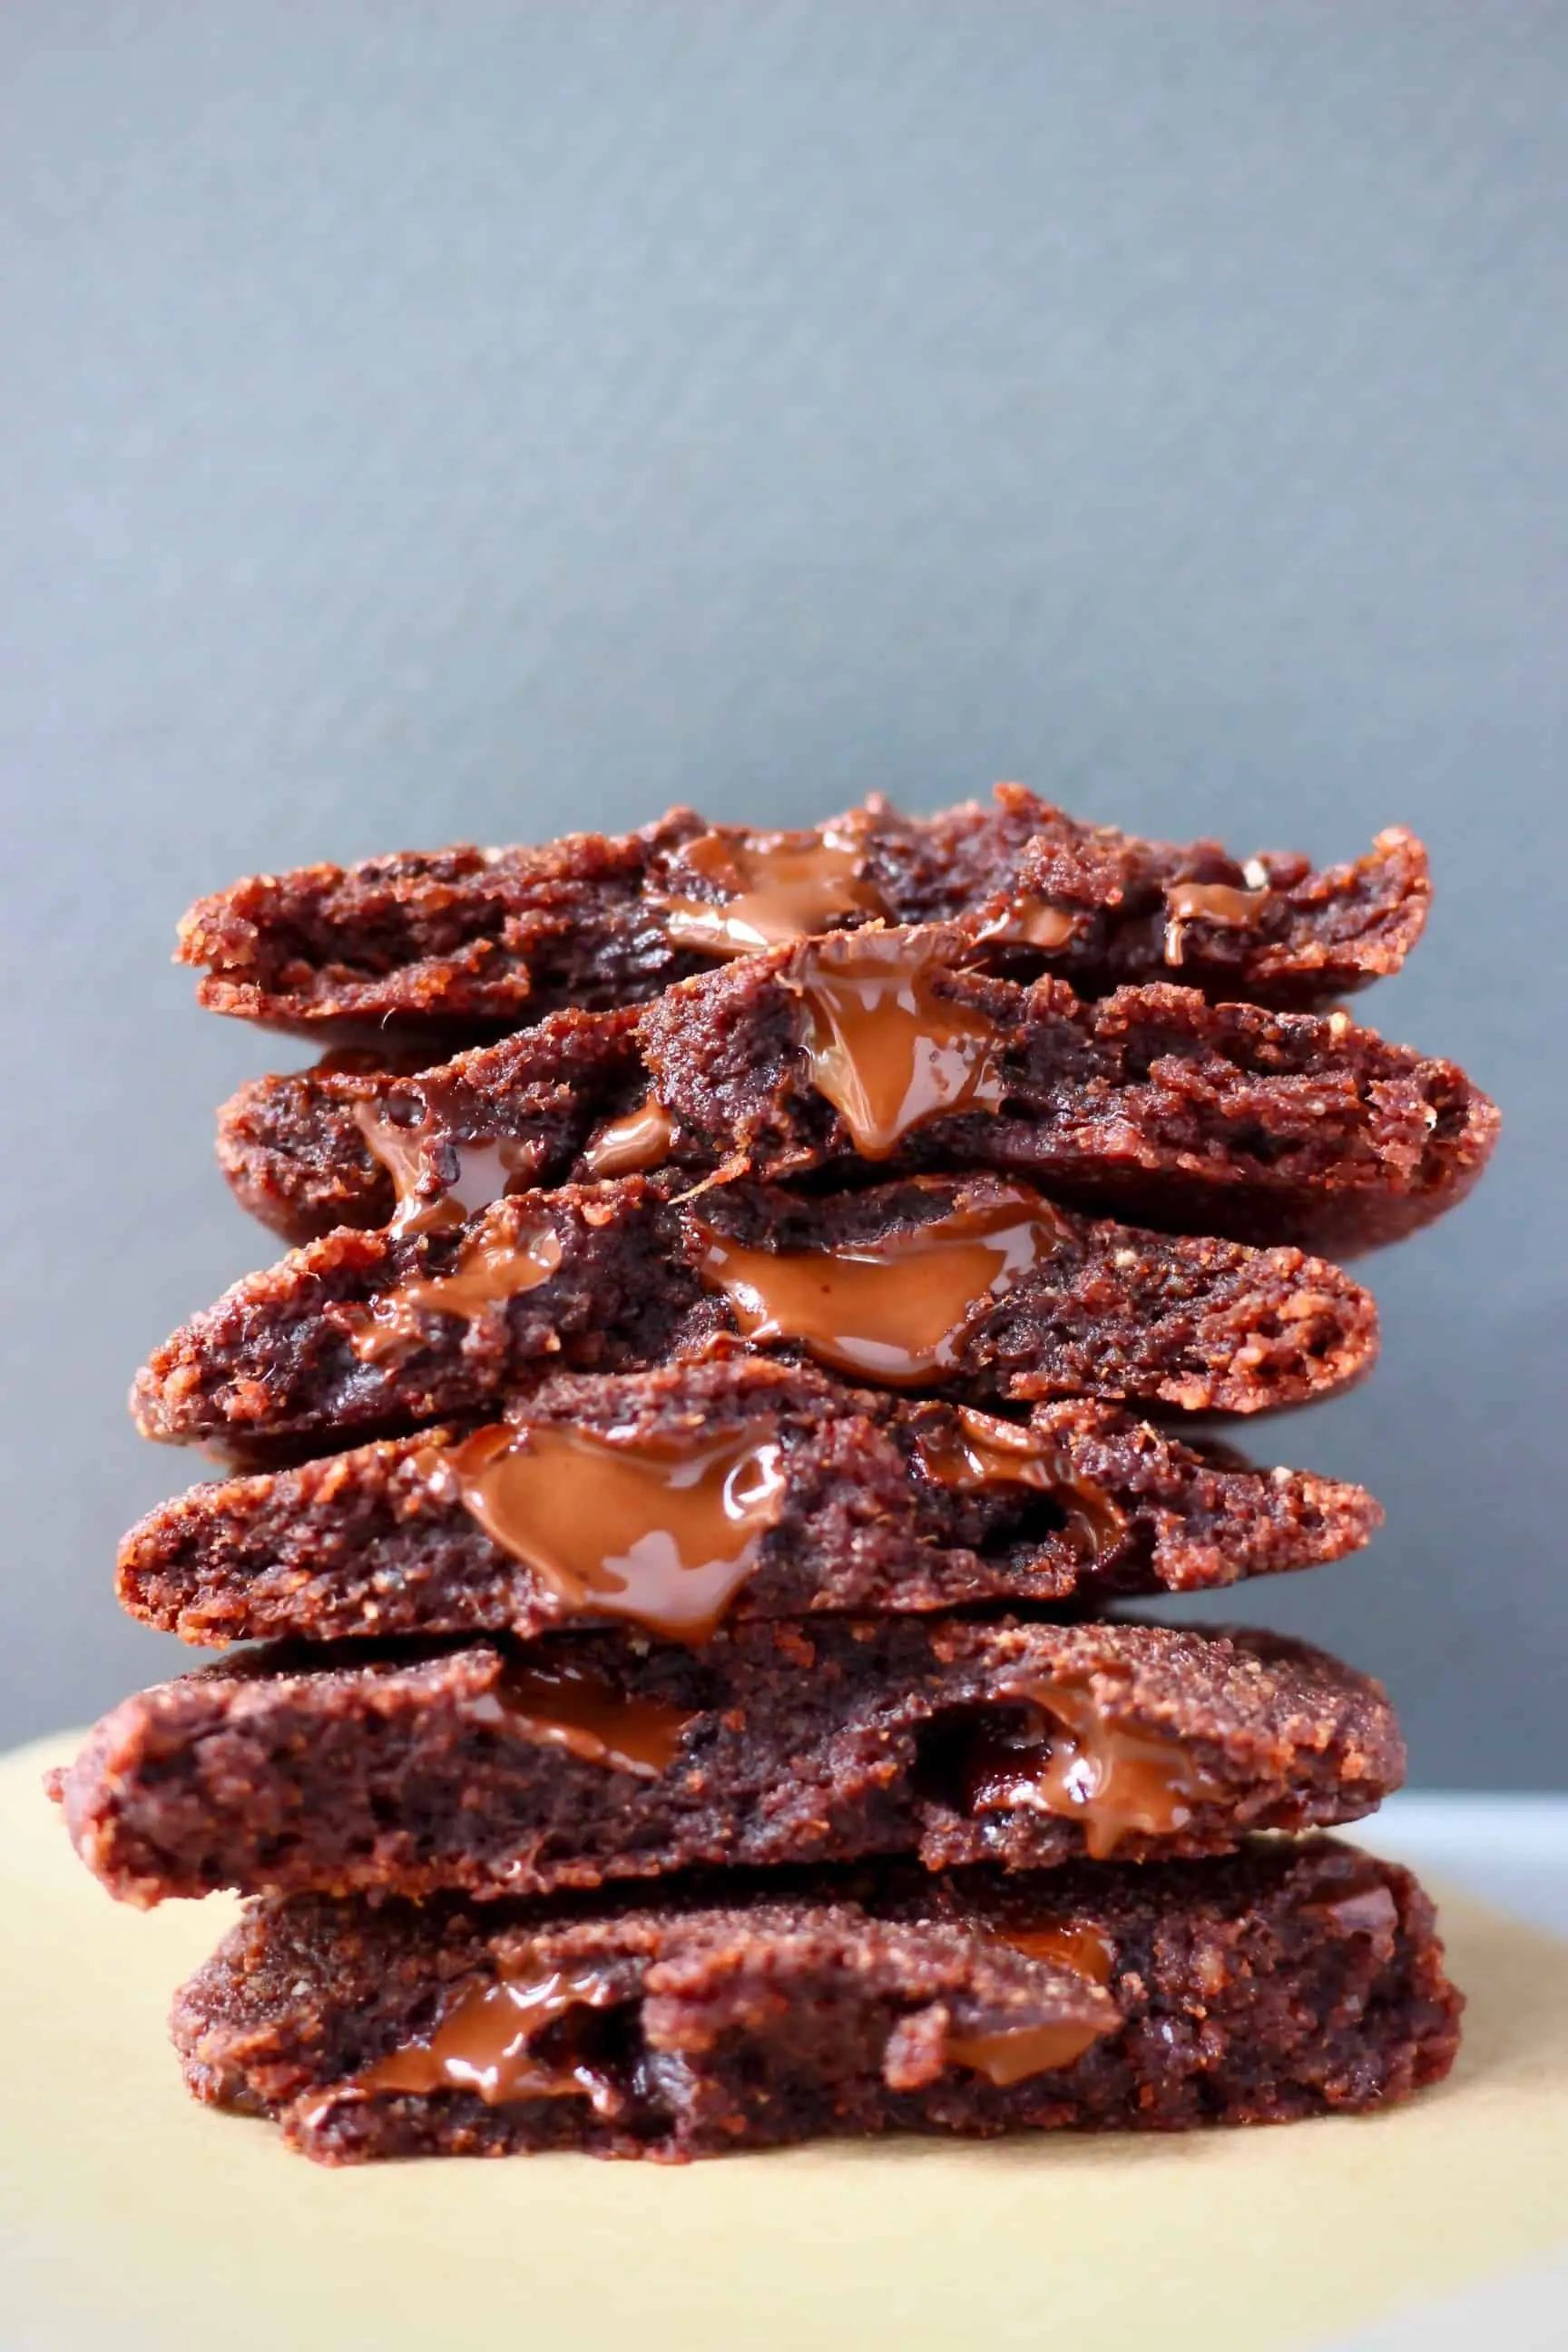 A stack of six chocolate cookies on a sheet of brown baking paper against a grey background